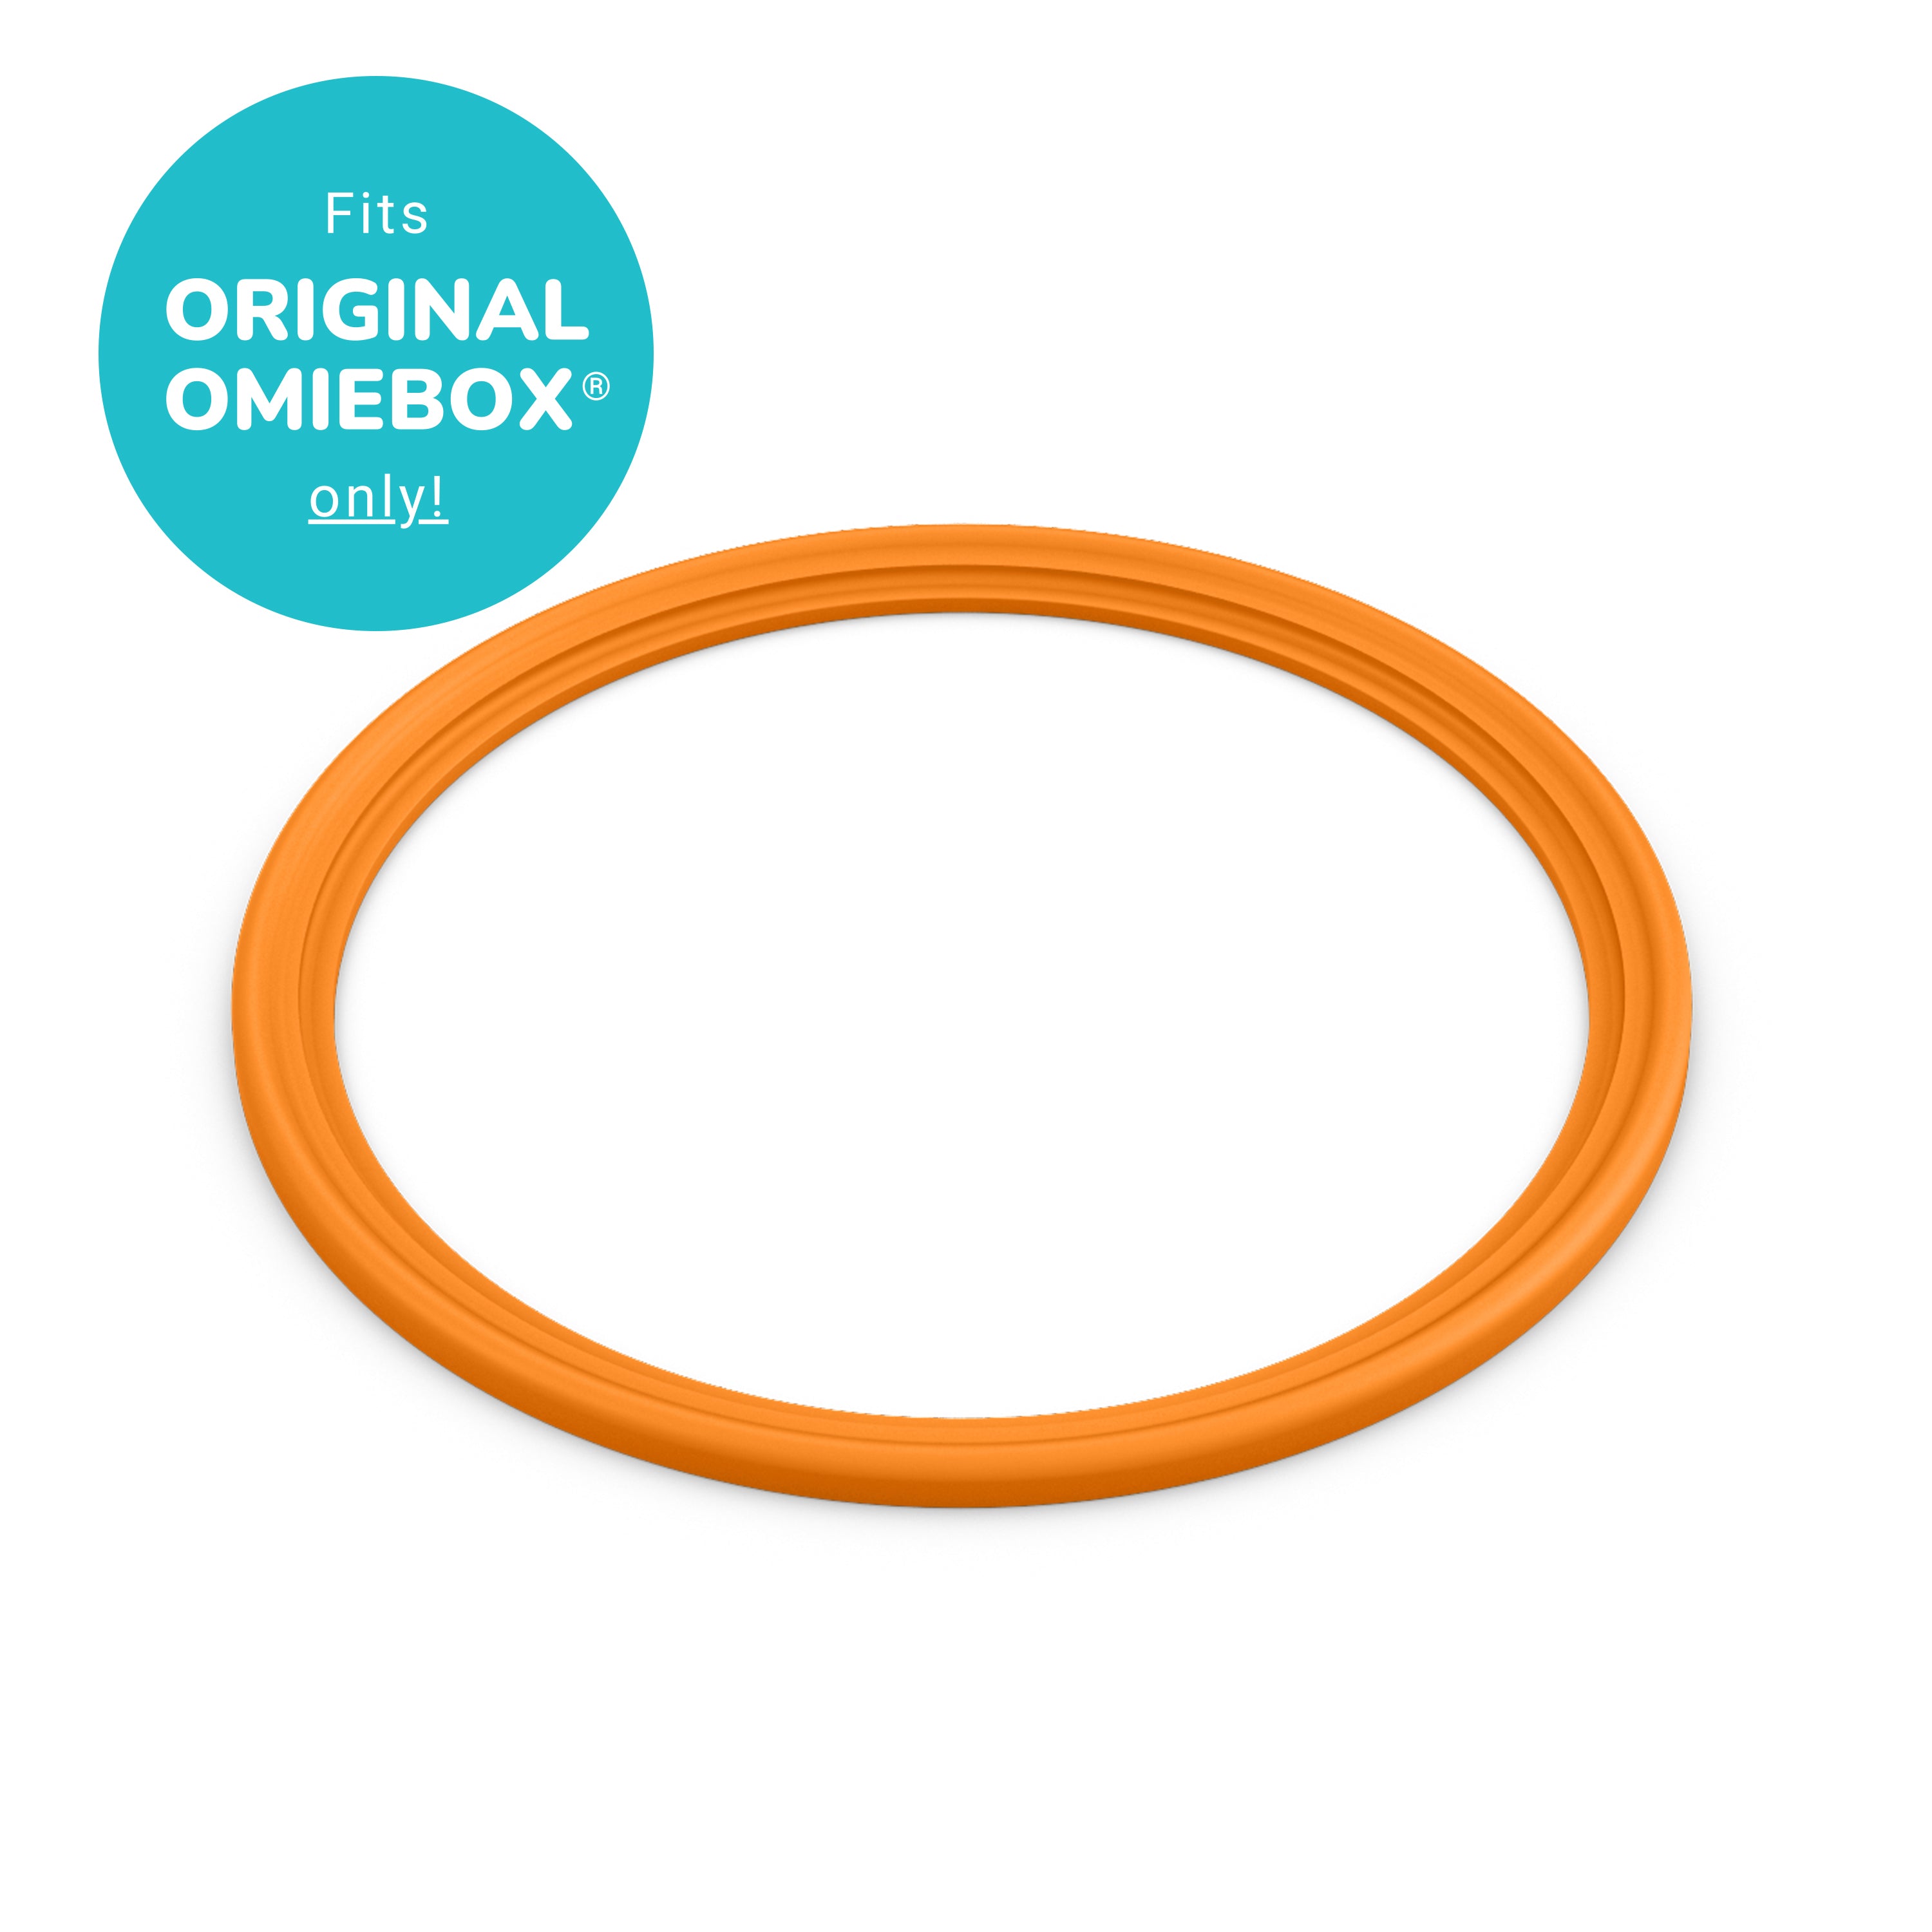 OmieBox - How to Install the Thermos Lid Gasket on Vimeo